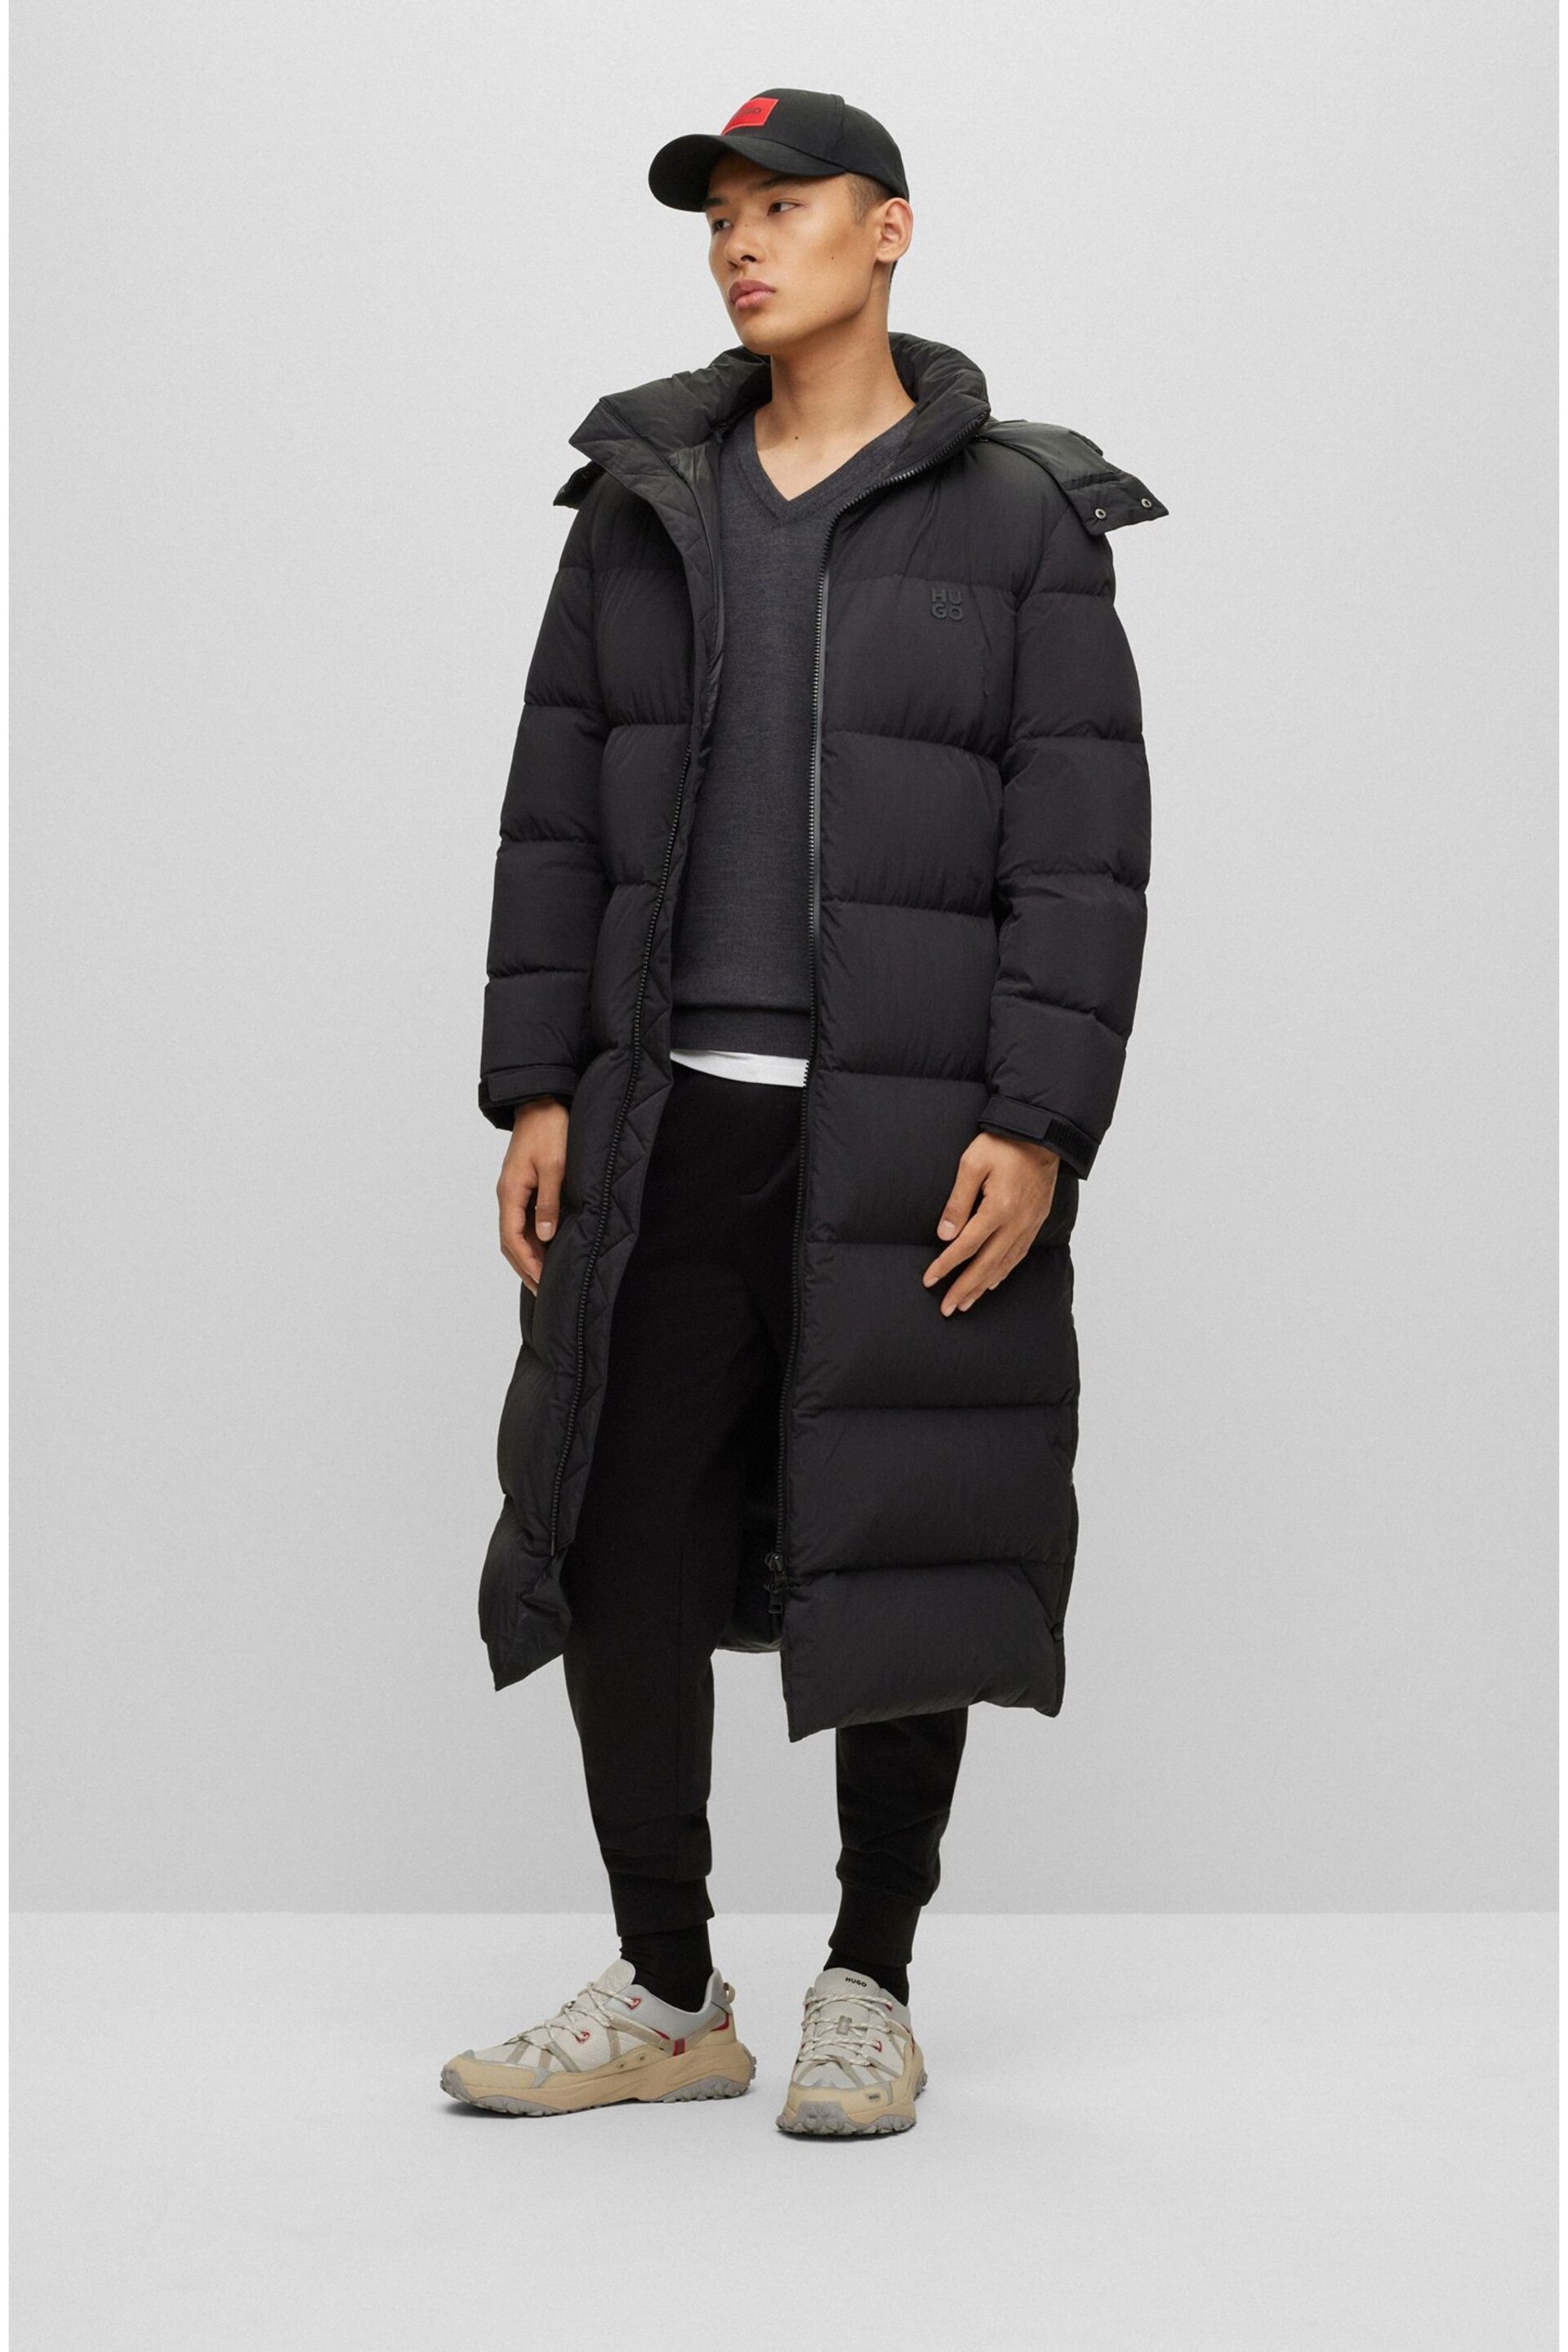 HUGO Mikky Long Down Puffer Jacket - Image 3 of 7